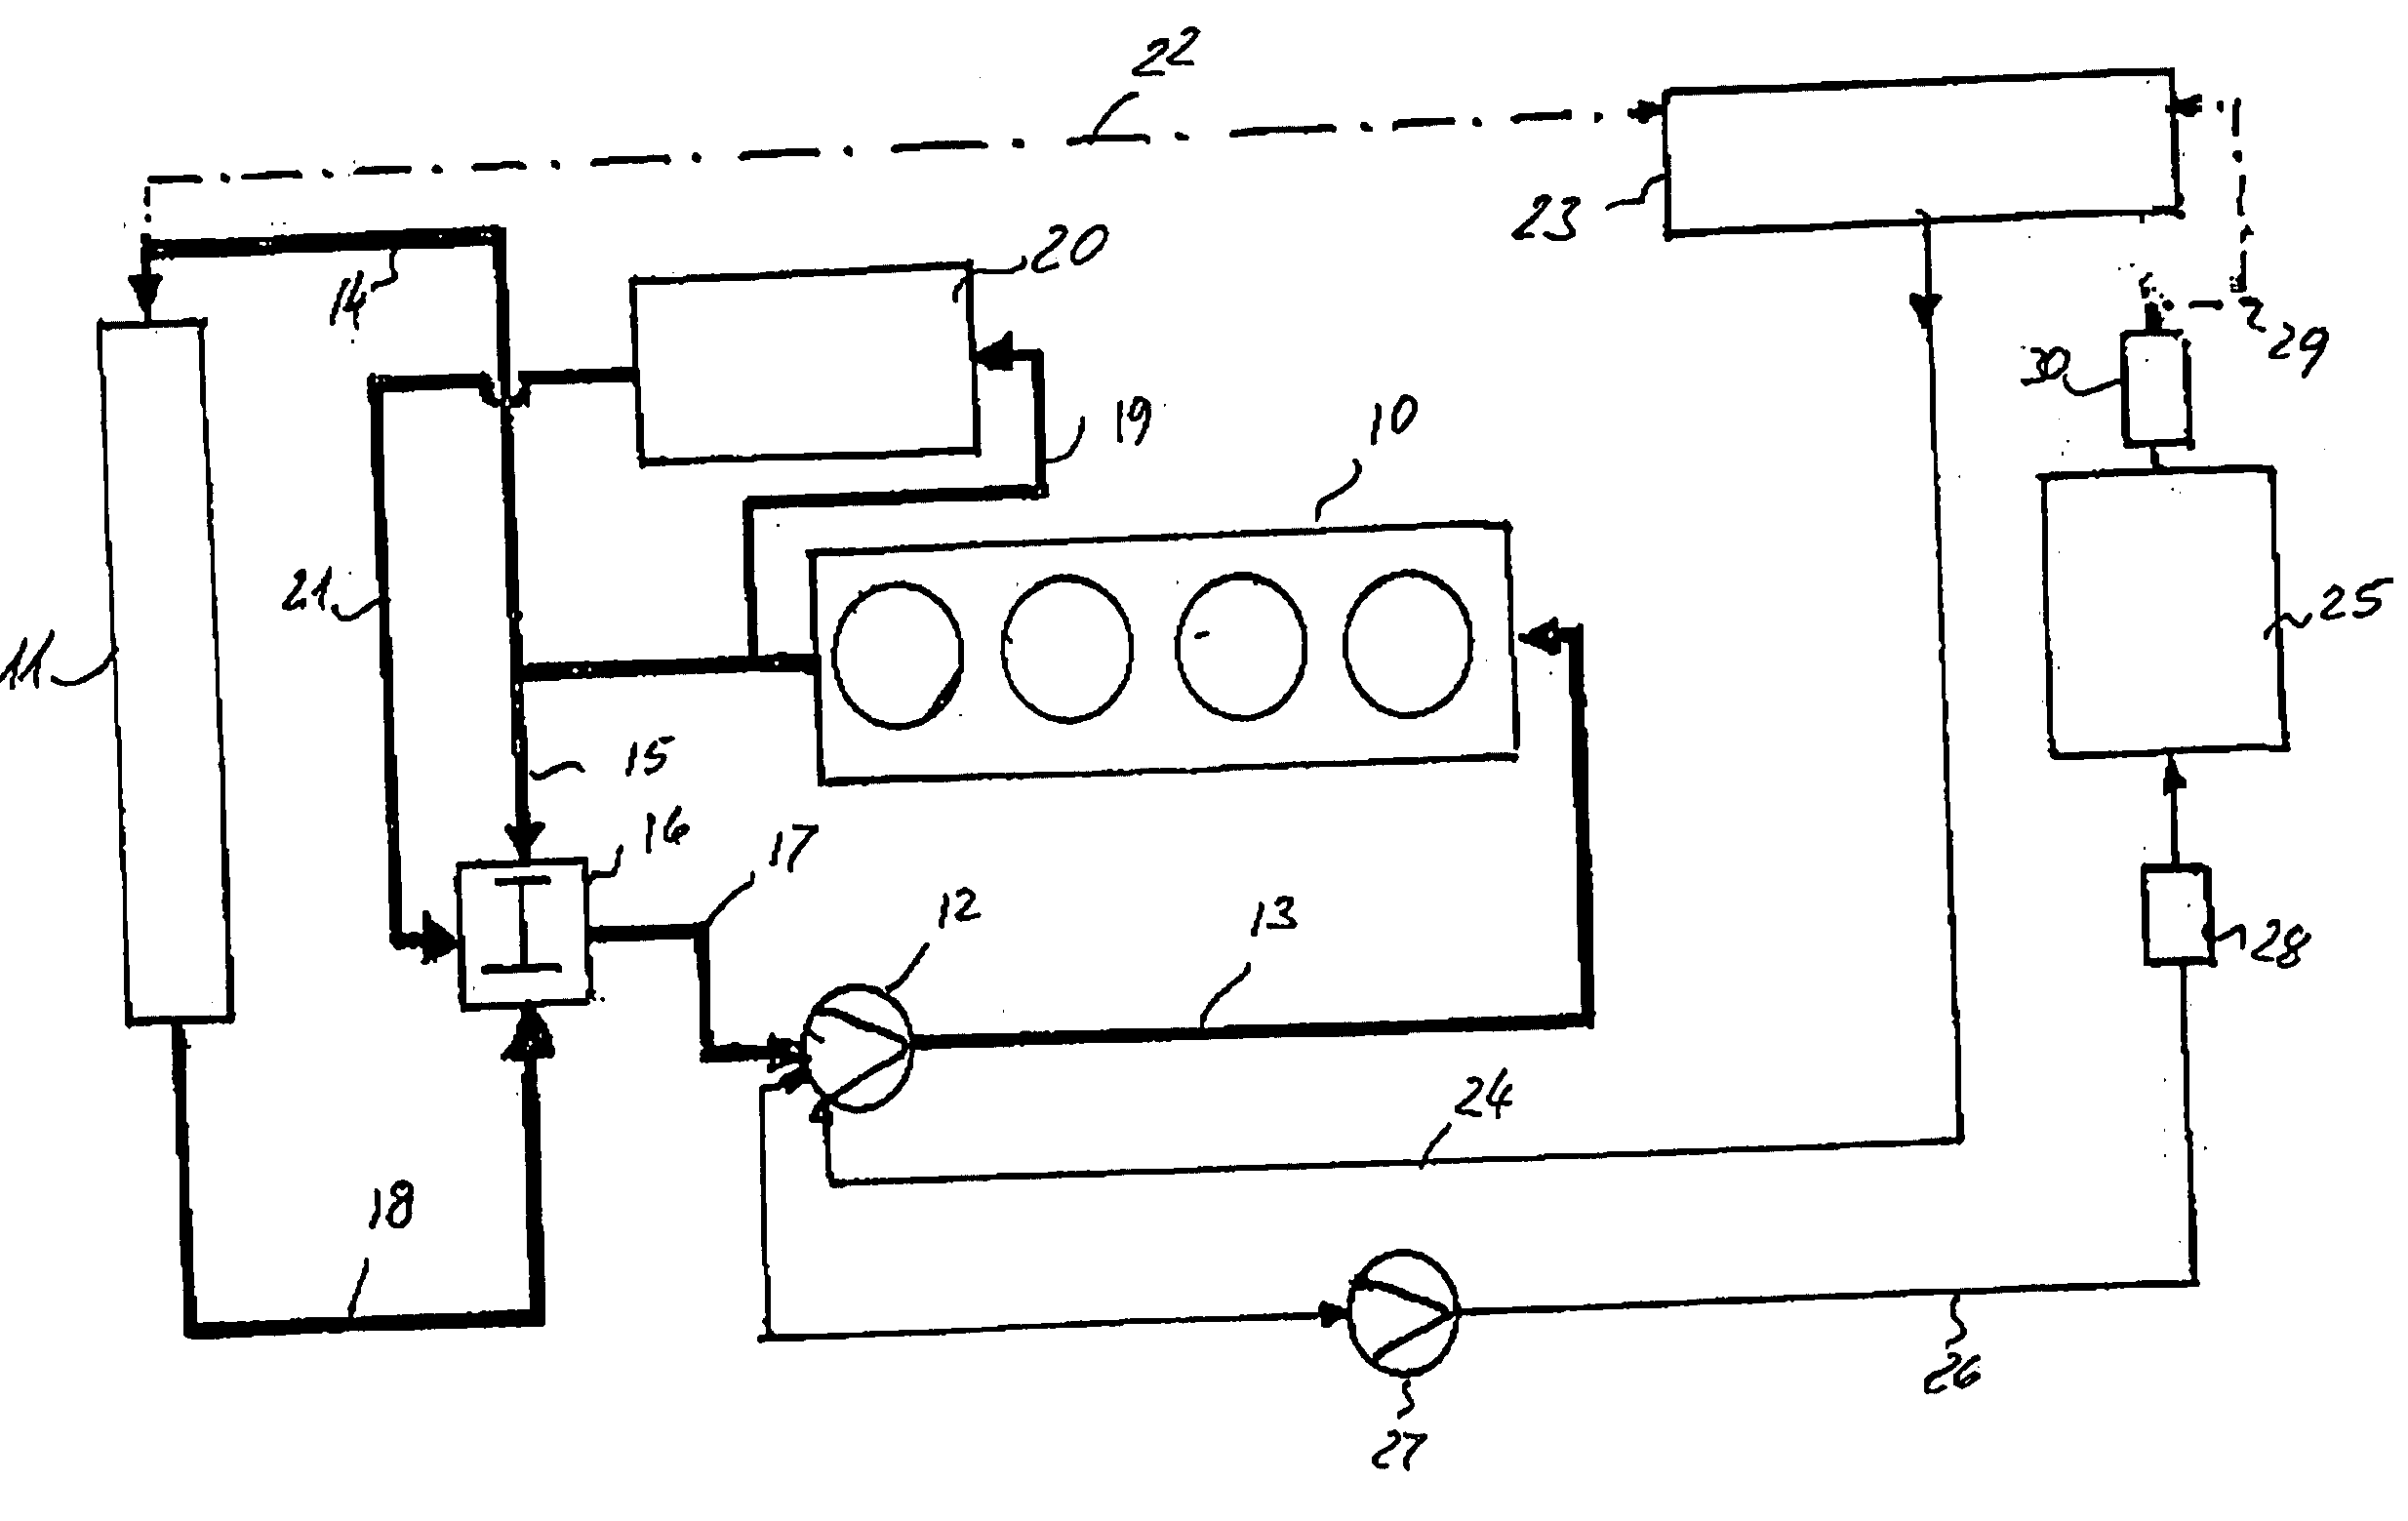 Method and apparatus for moderating the temperature of an internal combustion engine of a motor vehicle